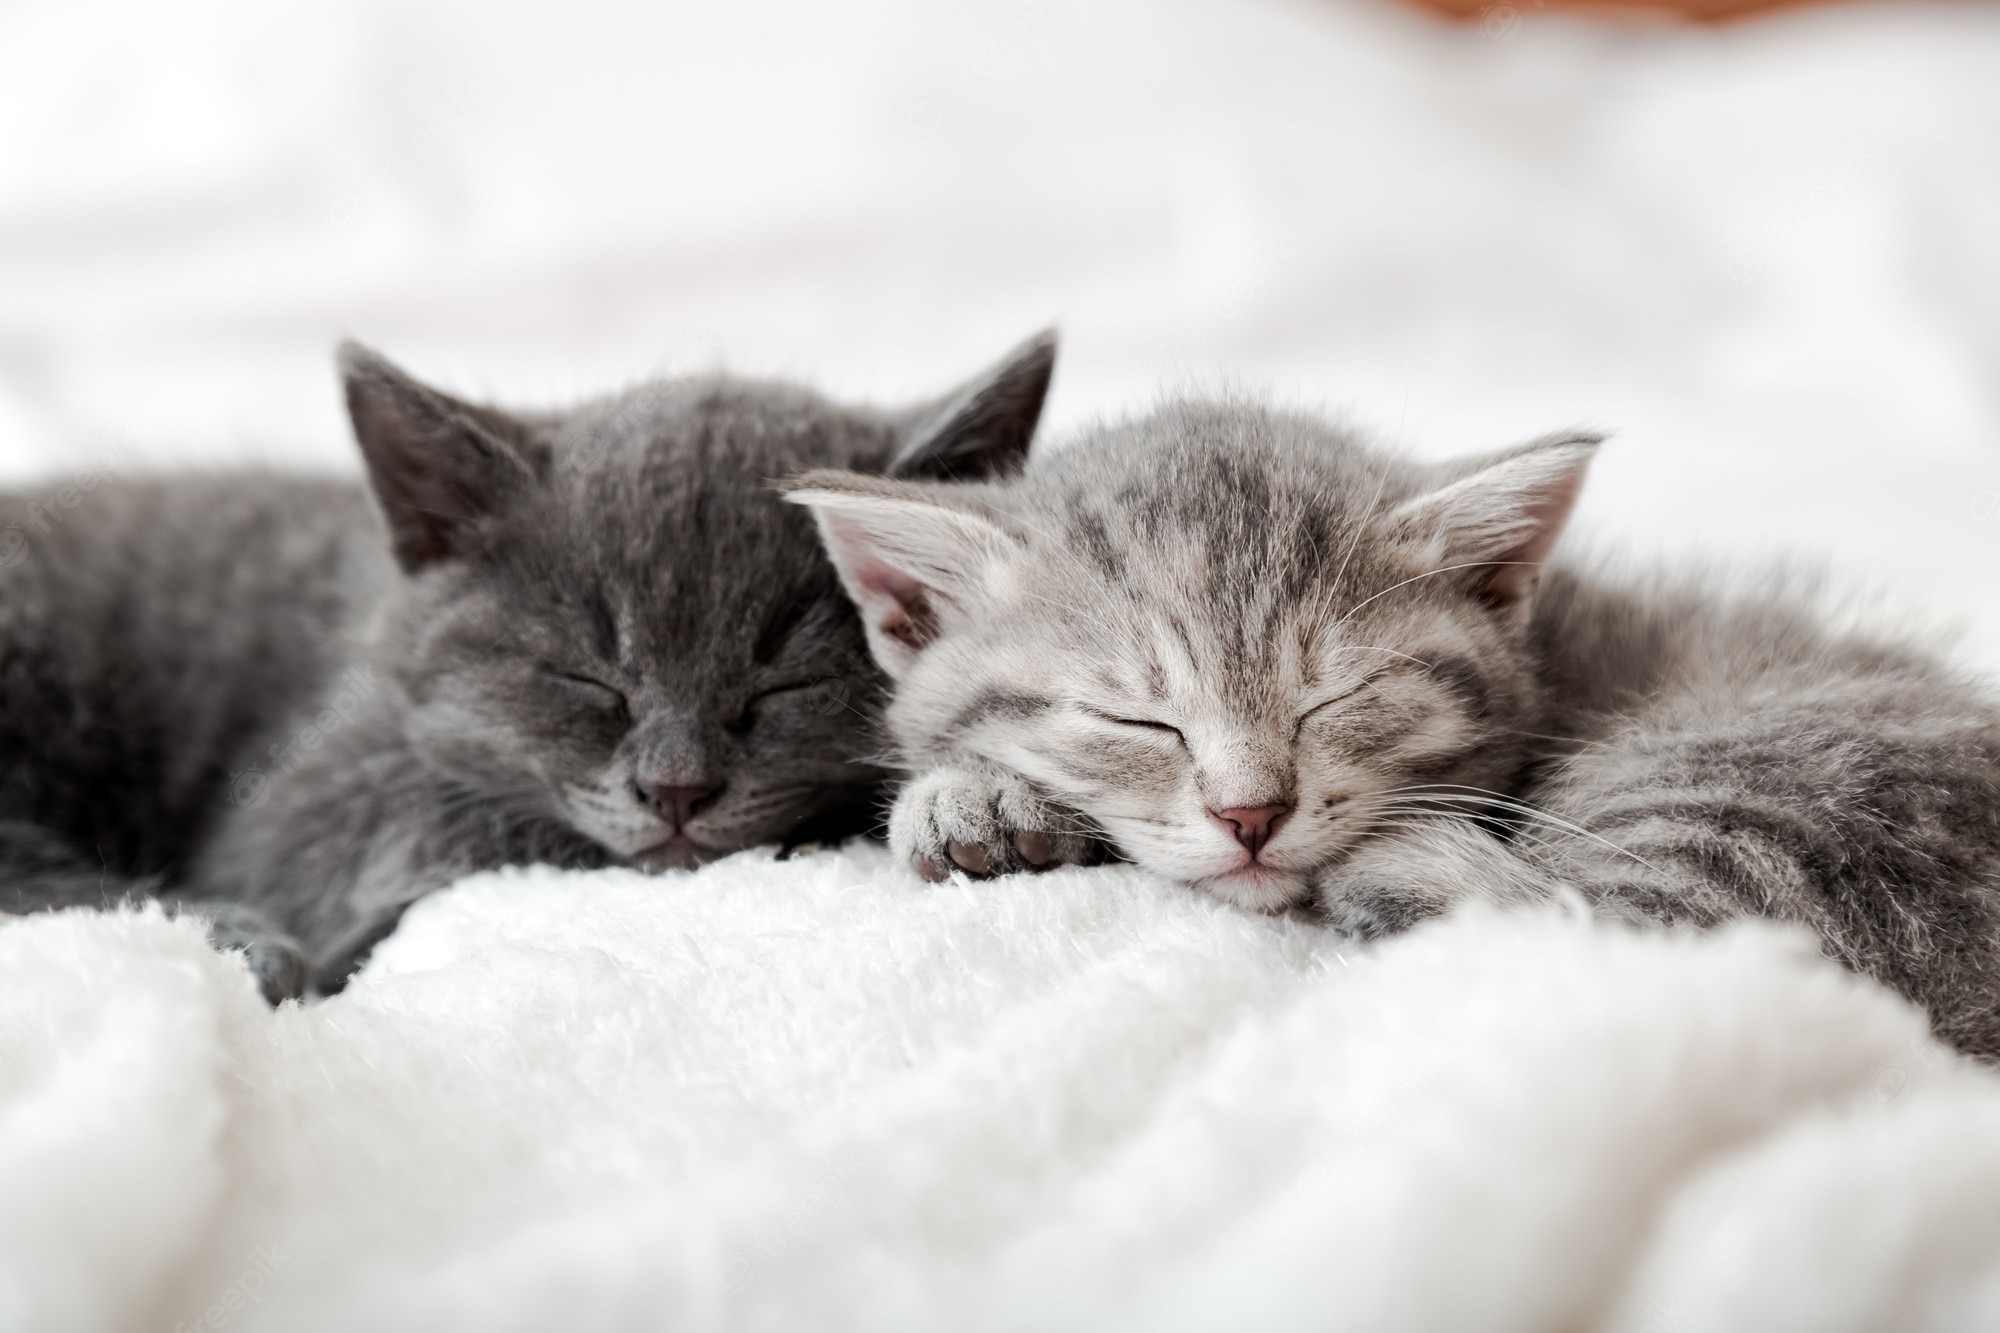 Two kittens Image. Free Vectors, & PSD